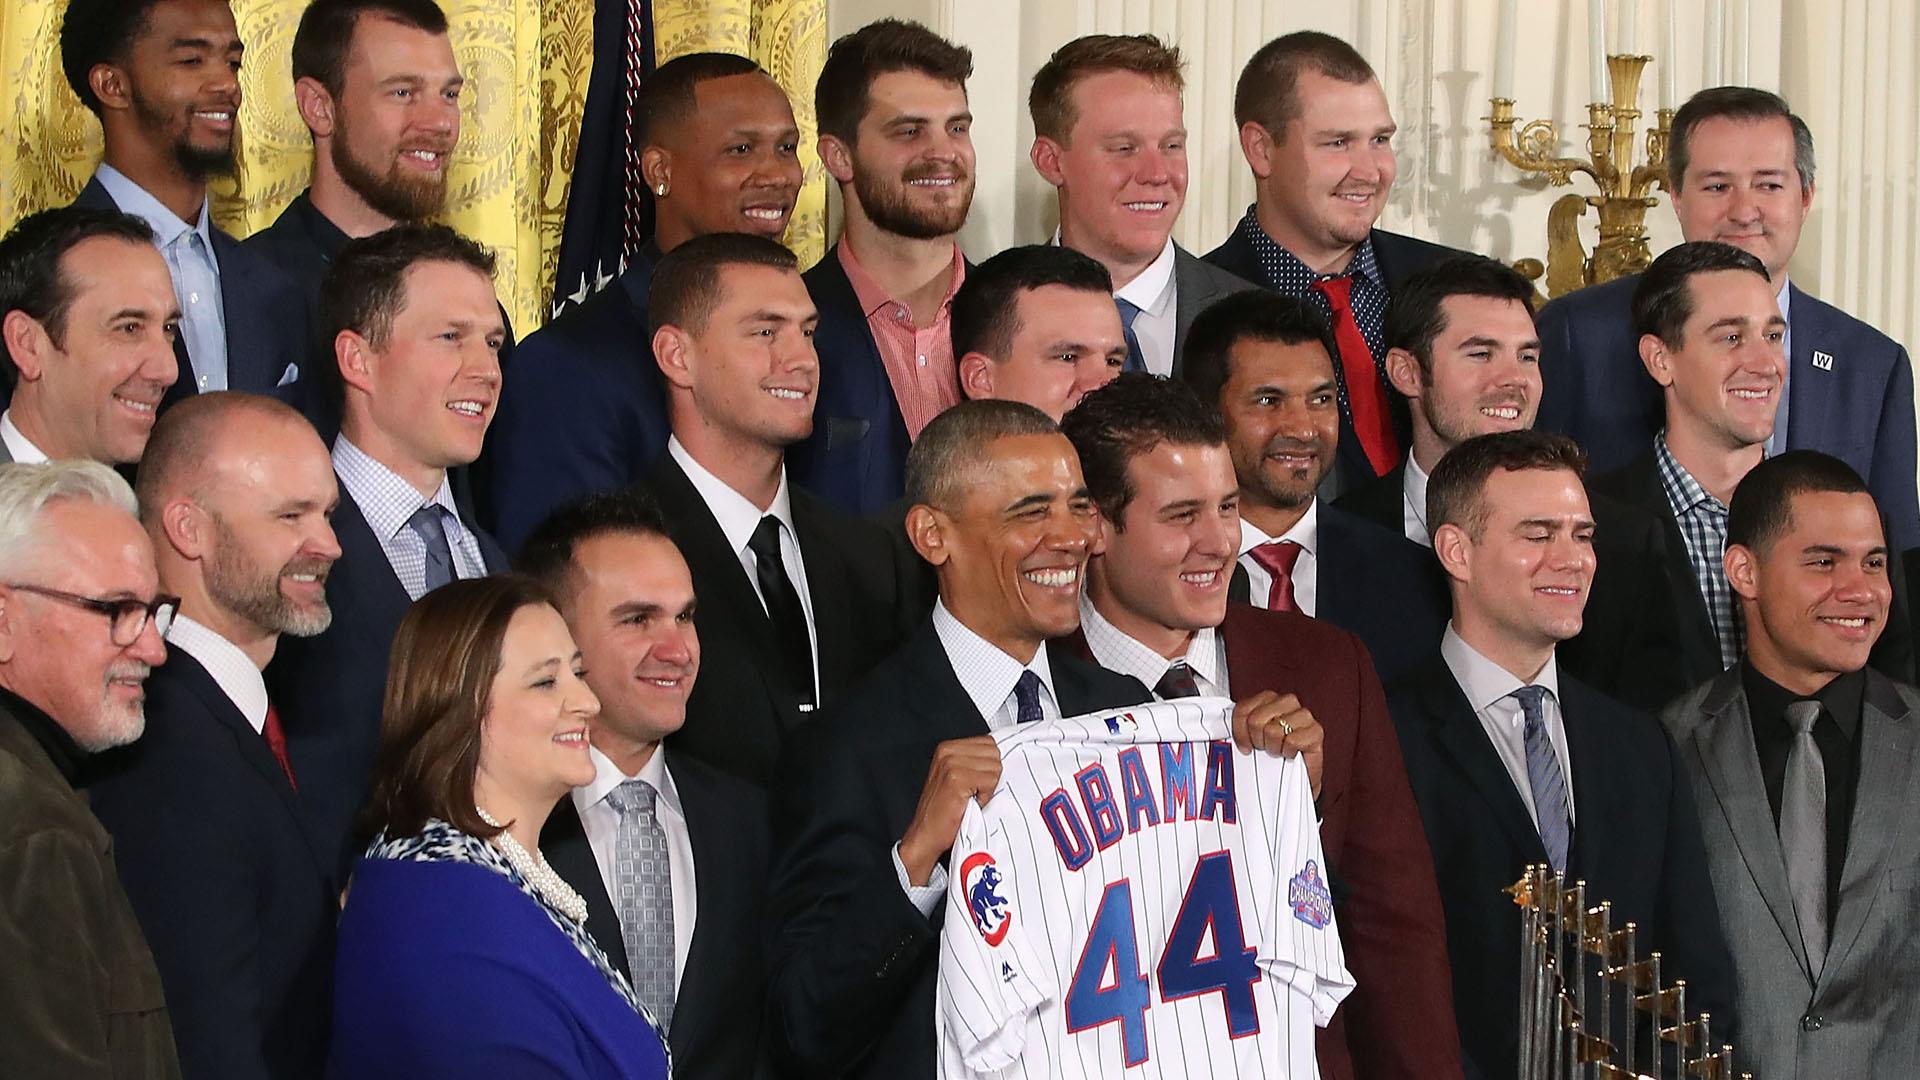 President Obama (a White Sox fan) welcomes Chicago Cubs to White House